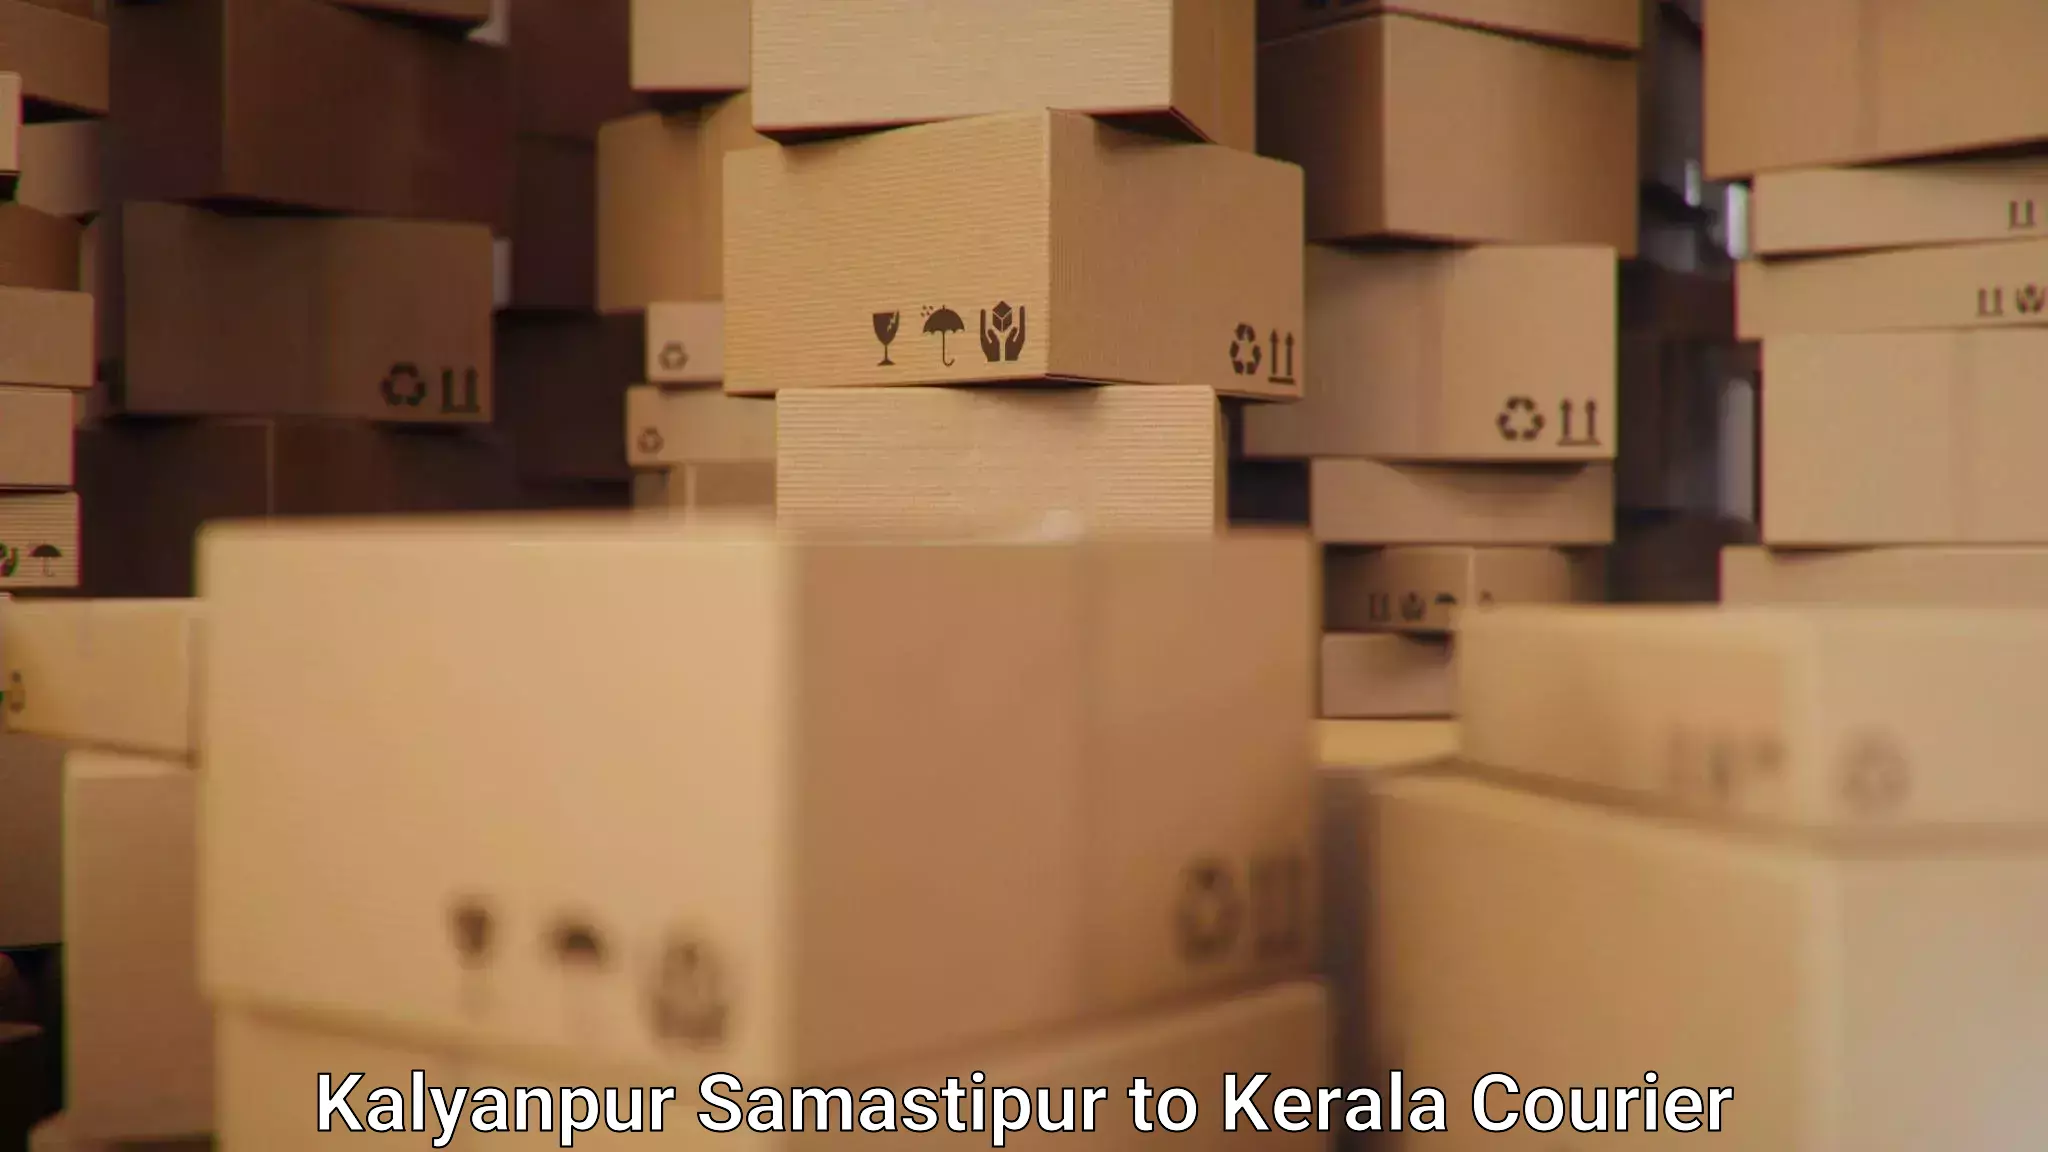 24/7 courier service in Kalyanpur Samastipur to Kollam